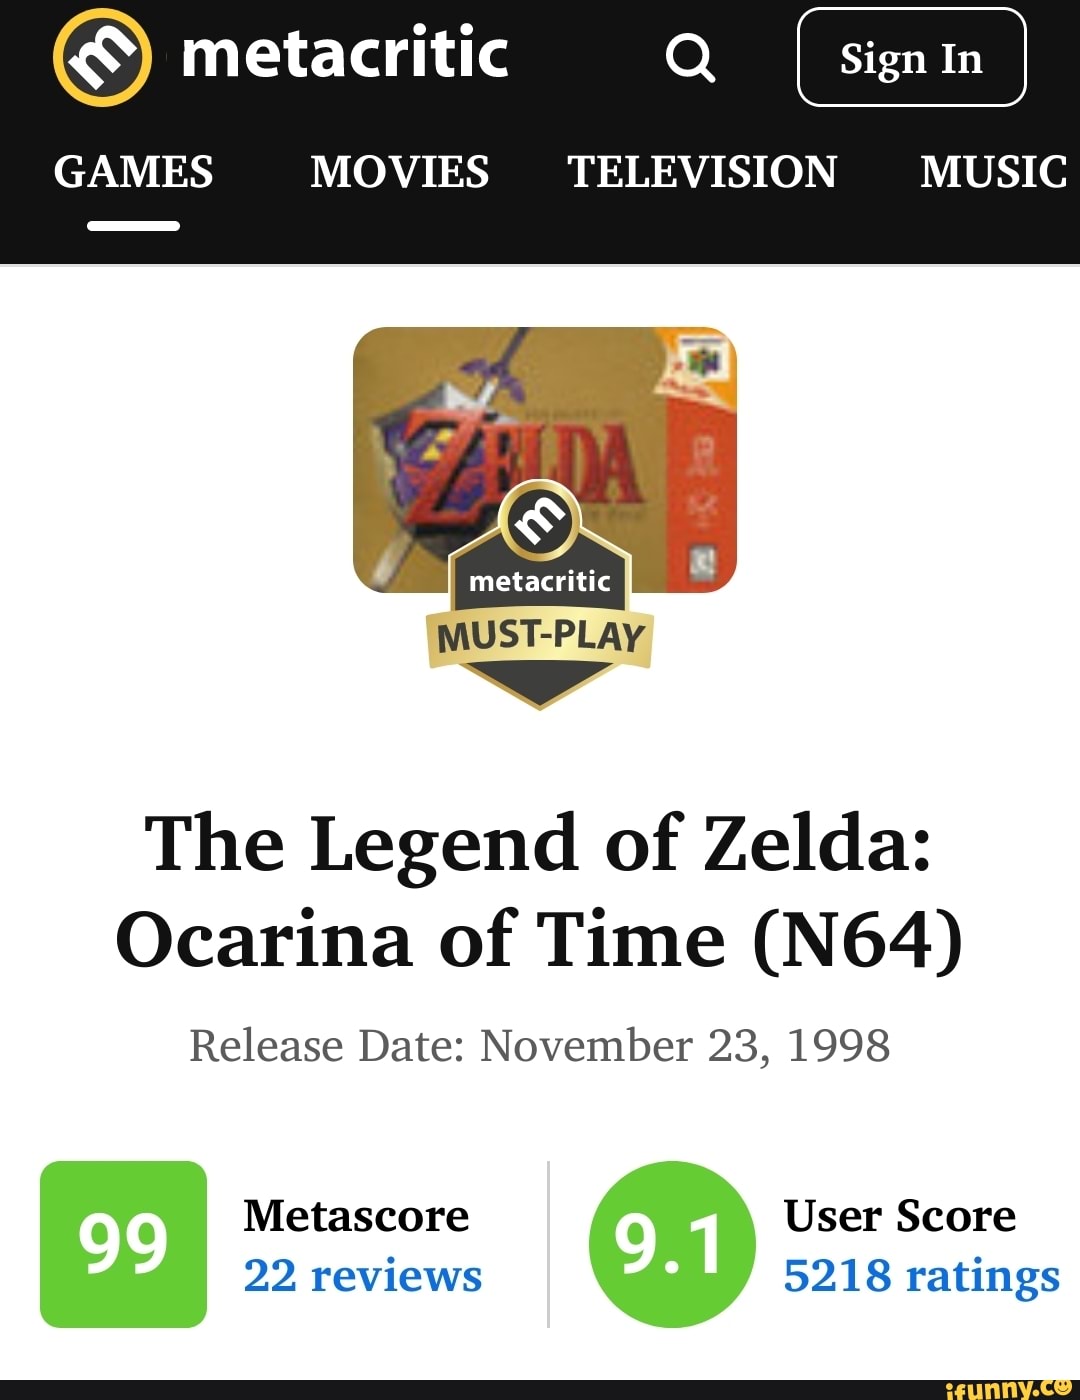 metacritic Q GAMES MOVIES TELEVISION MUSIC The Legend of Zelda